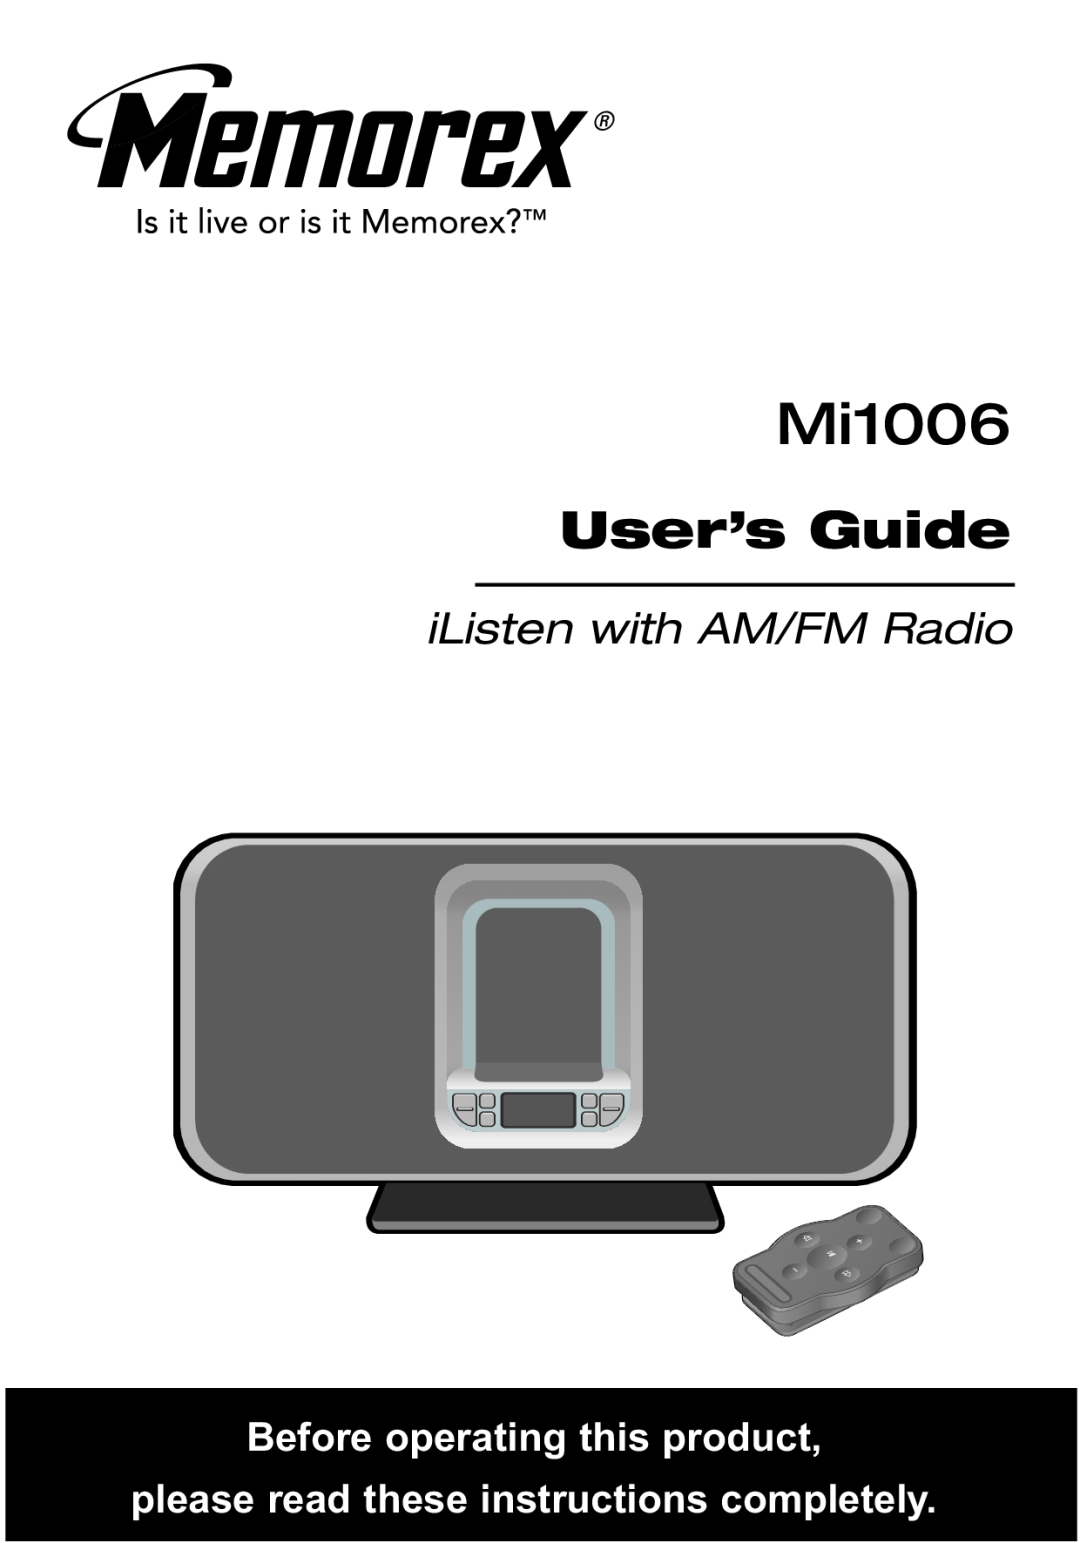 Memorex Mi1006 manual User’s Guide, iListen with AM/FM Radio, Before operating this product 